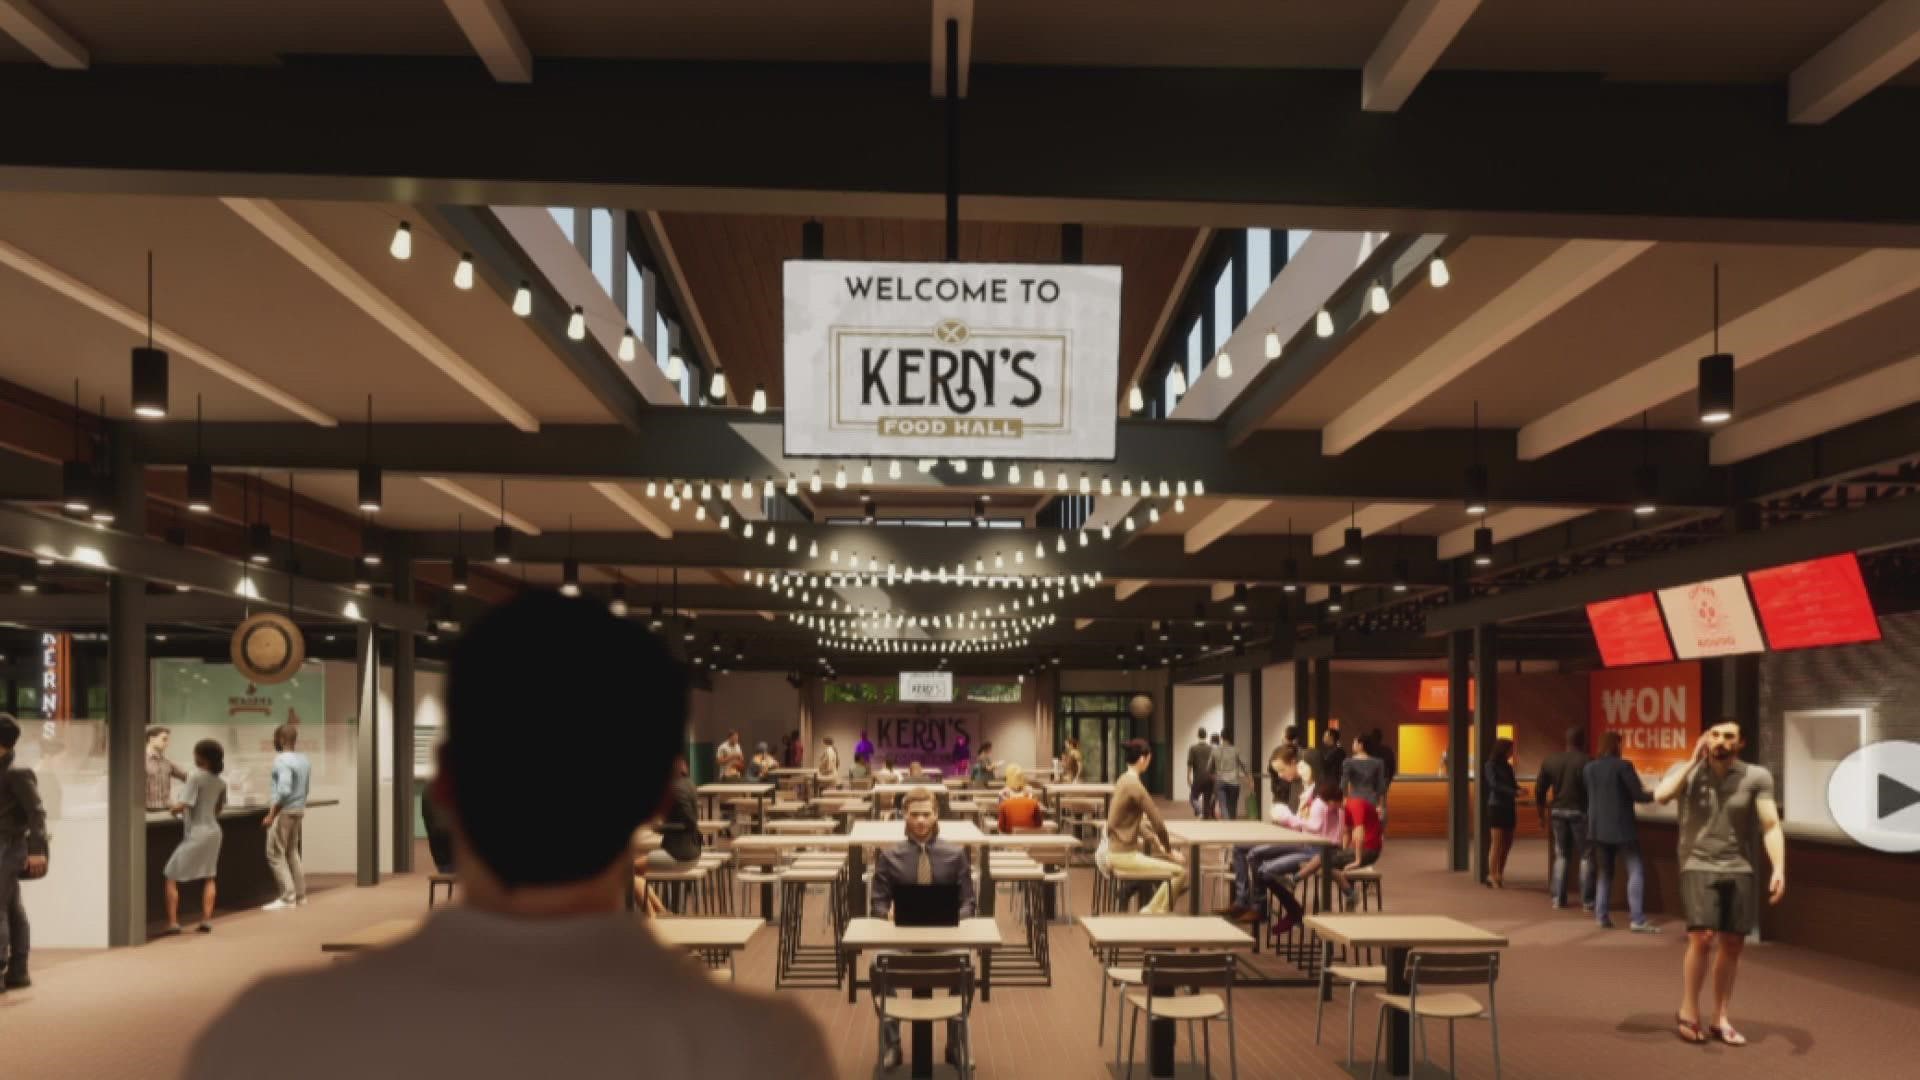 Kern's Bakery site is a step closer to becoming Knoxville's second food hall. Developers say it'll include restaurants, rooftop bars, and a place to gather outdoors.